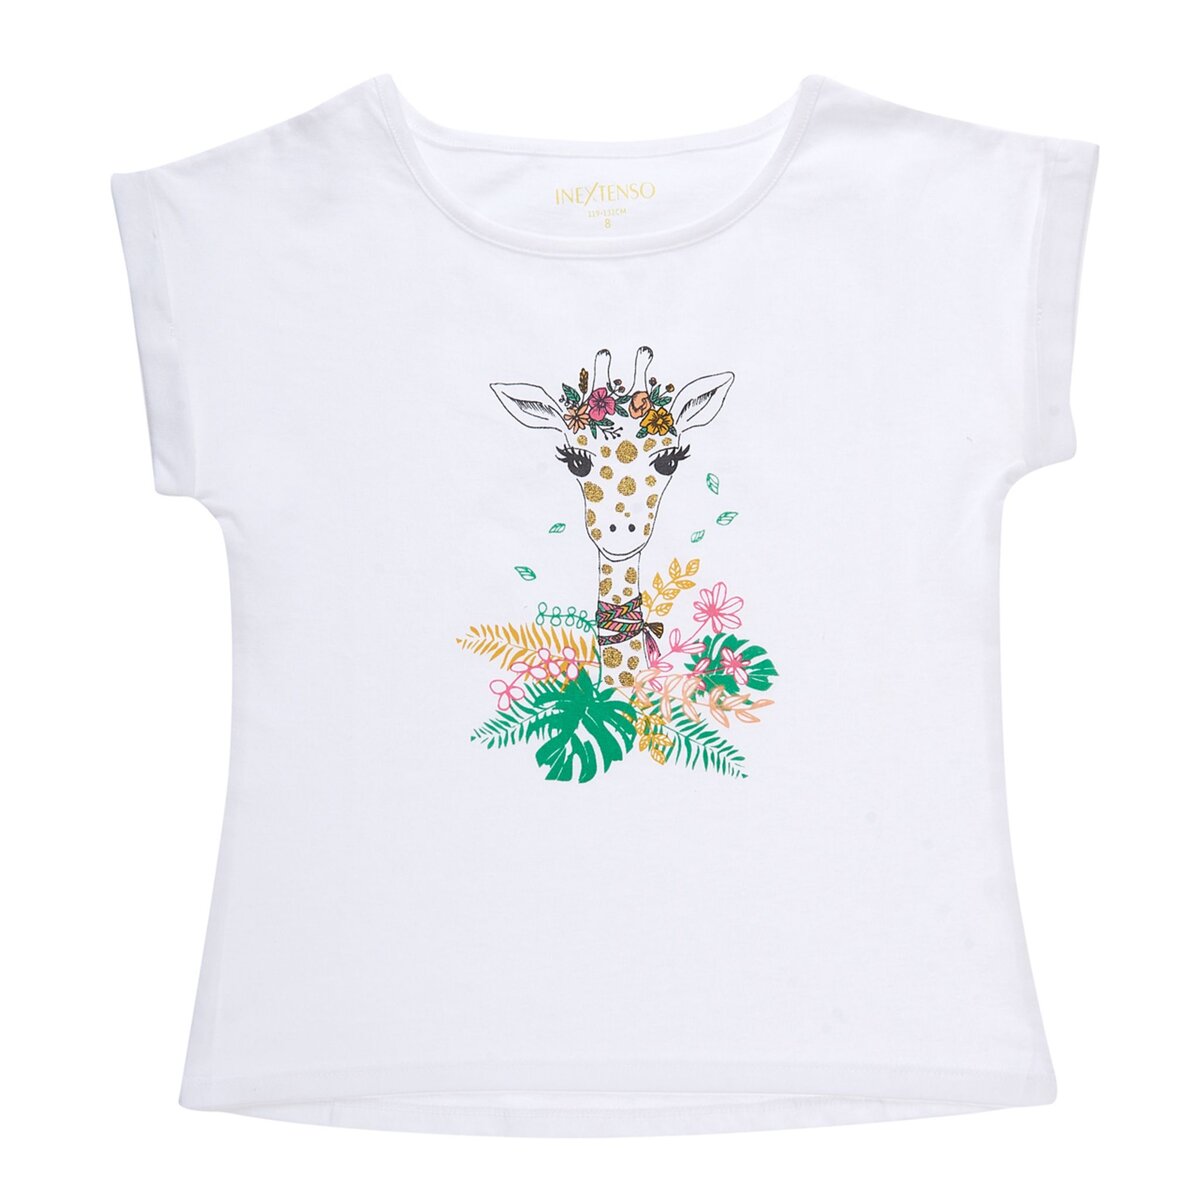 IN EXTENSO T-shirt manches courtes girafe fille